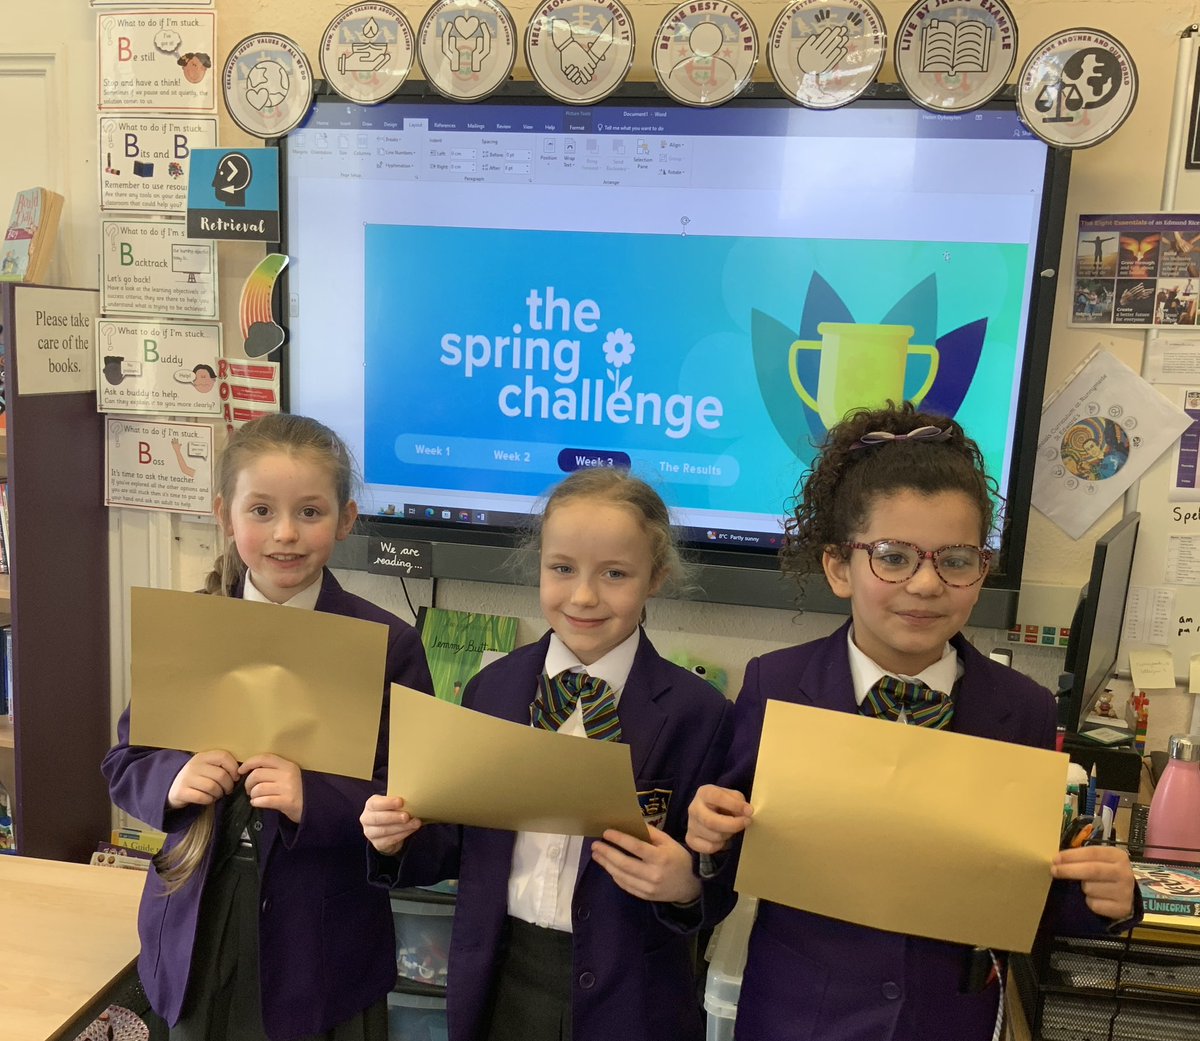 Congratulations to our Yr3 CENTURY Spring Champions this week! These fantastic pupils have worked so hard to complete assignments using our online learning platform @ThisIsCentury Superstars⭐️ ⭐️⭐️ #RunnymedeInspire